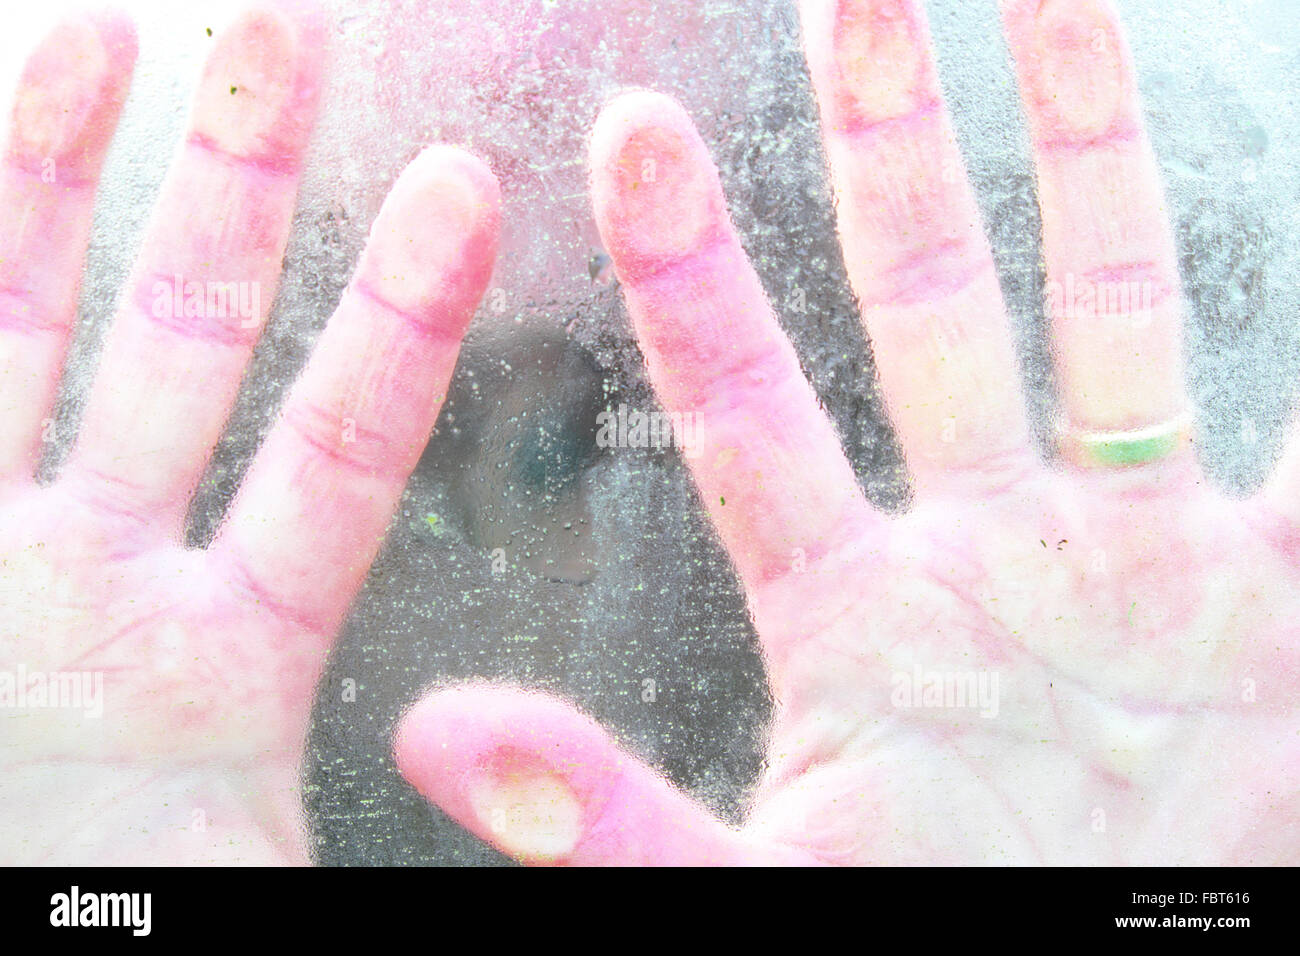 Cold weather cold hands pressed against a cold window Stock Photo